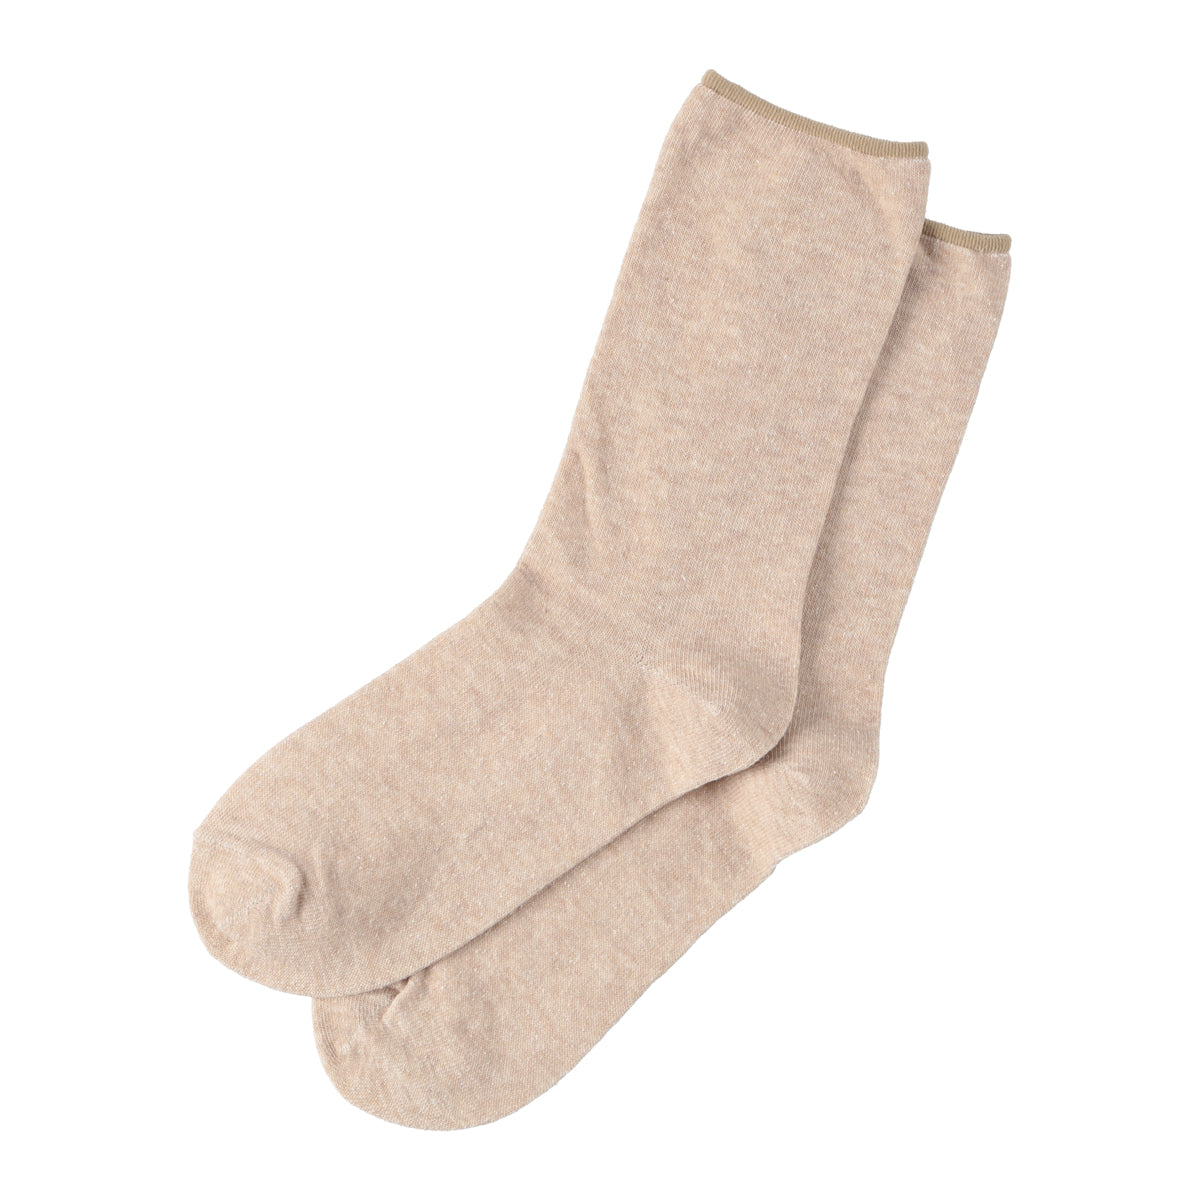 Silk and Cotton mixed Socks (BEIGE)